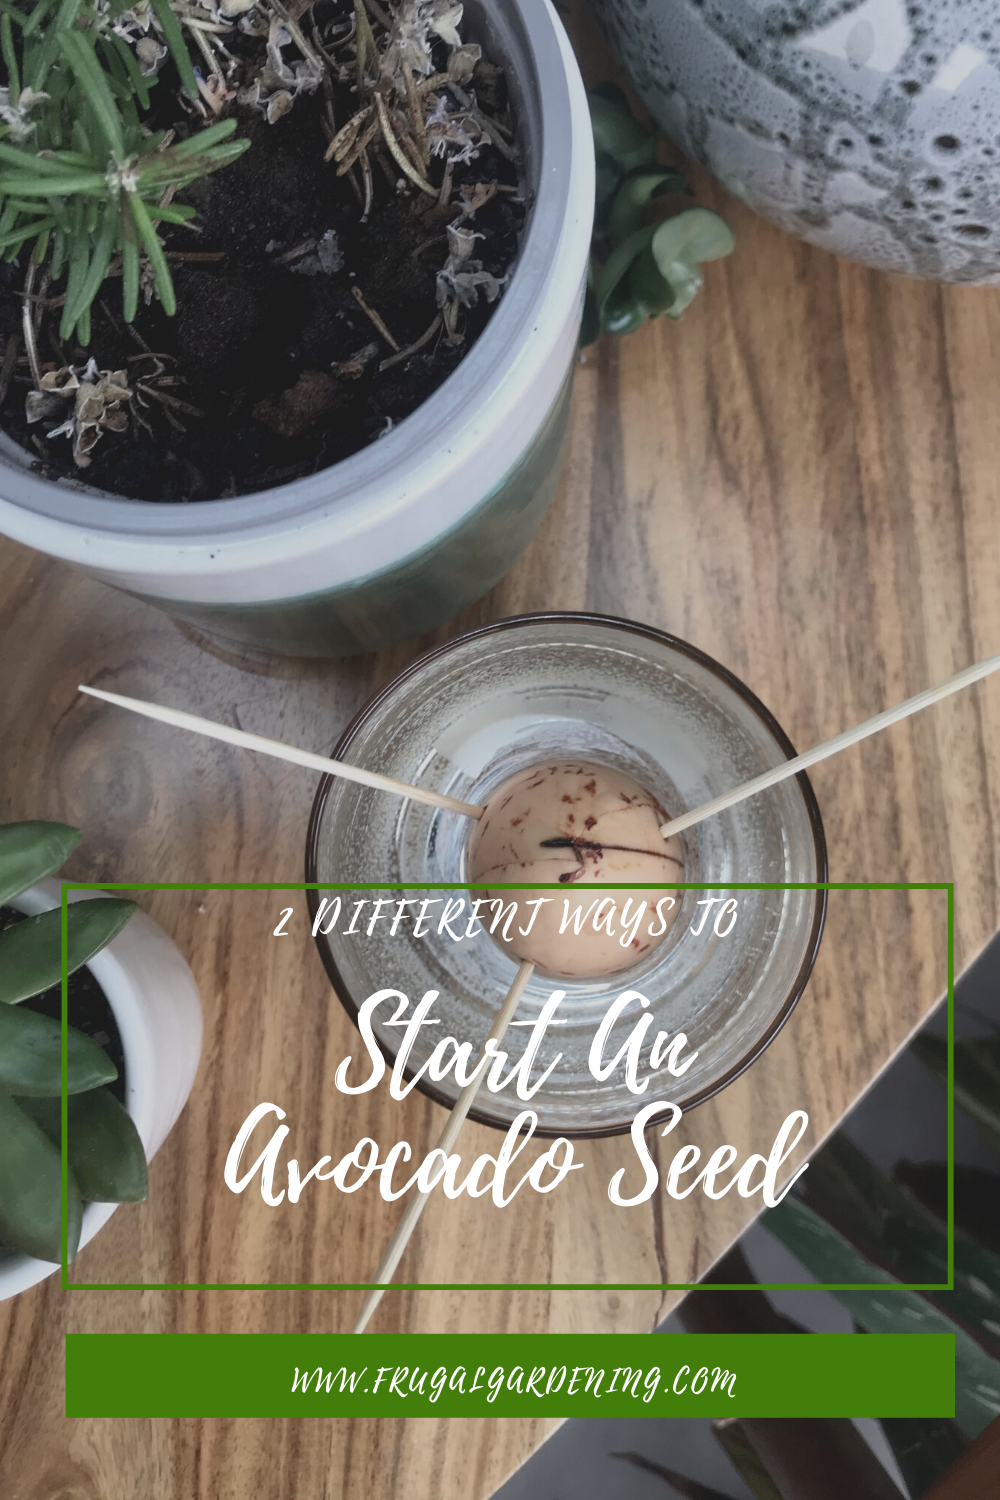 2 Different Ways To Start An Avocado Seed